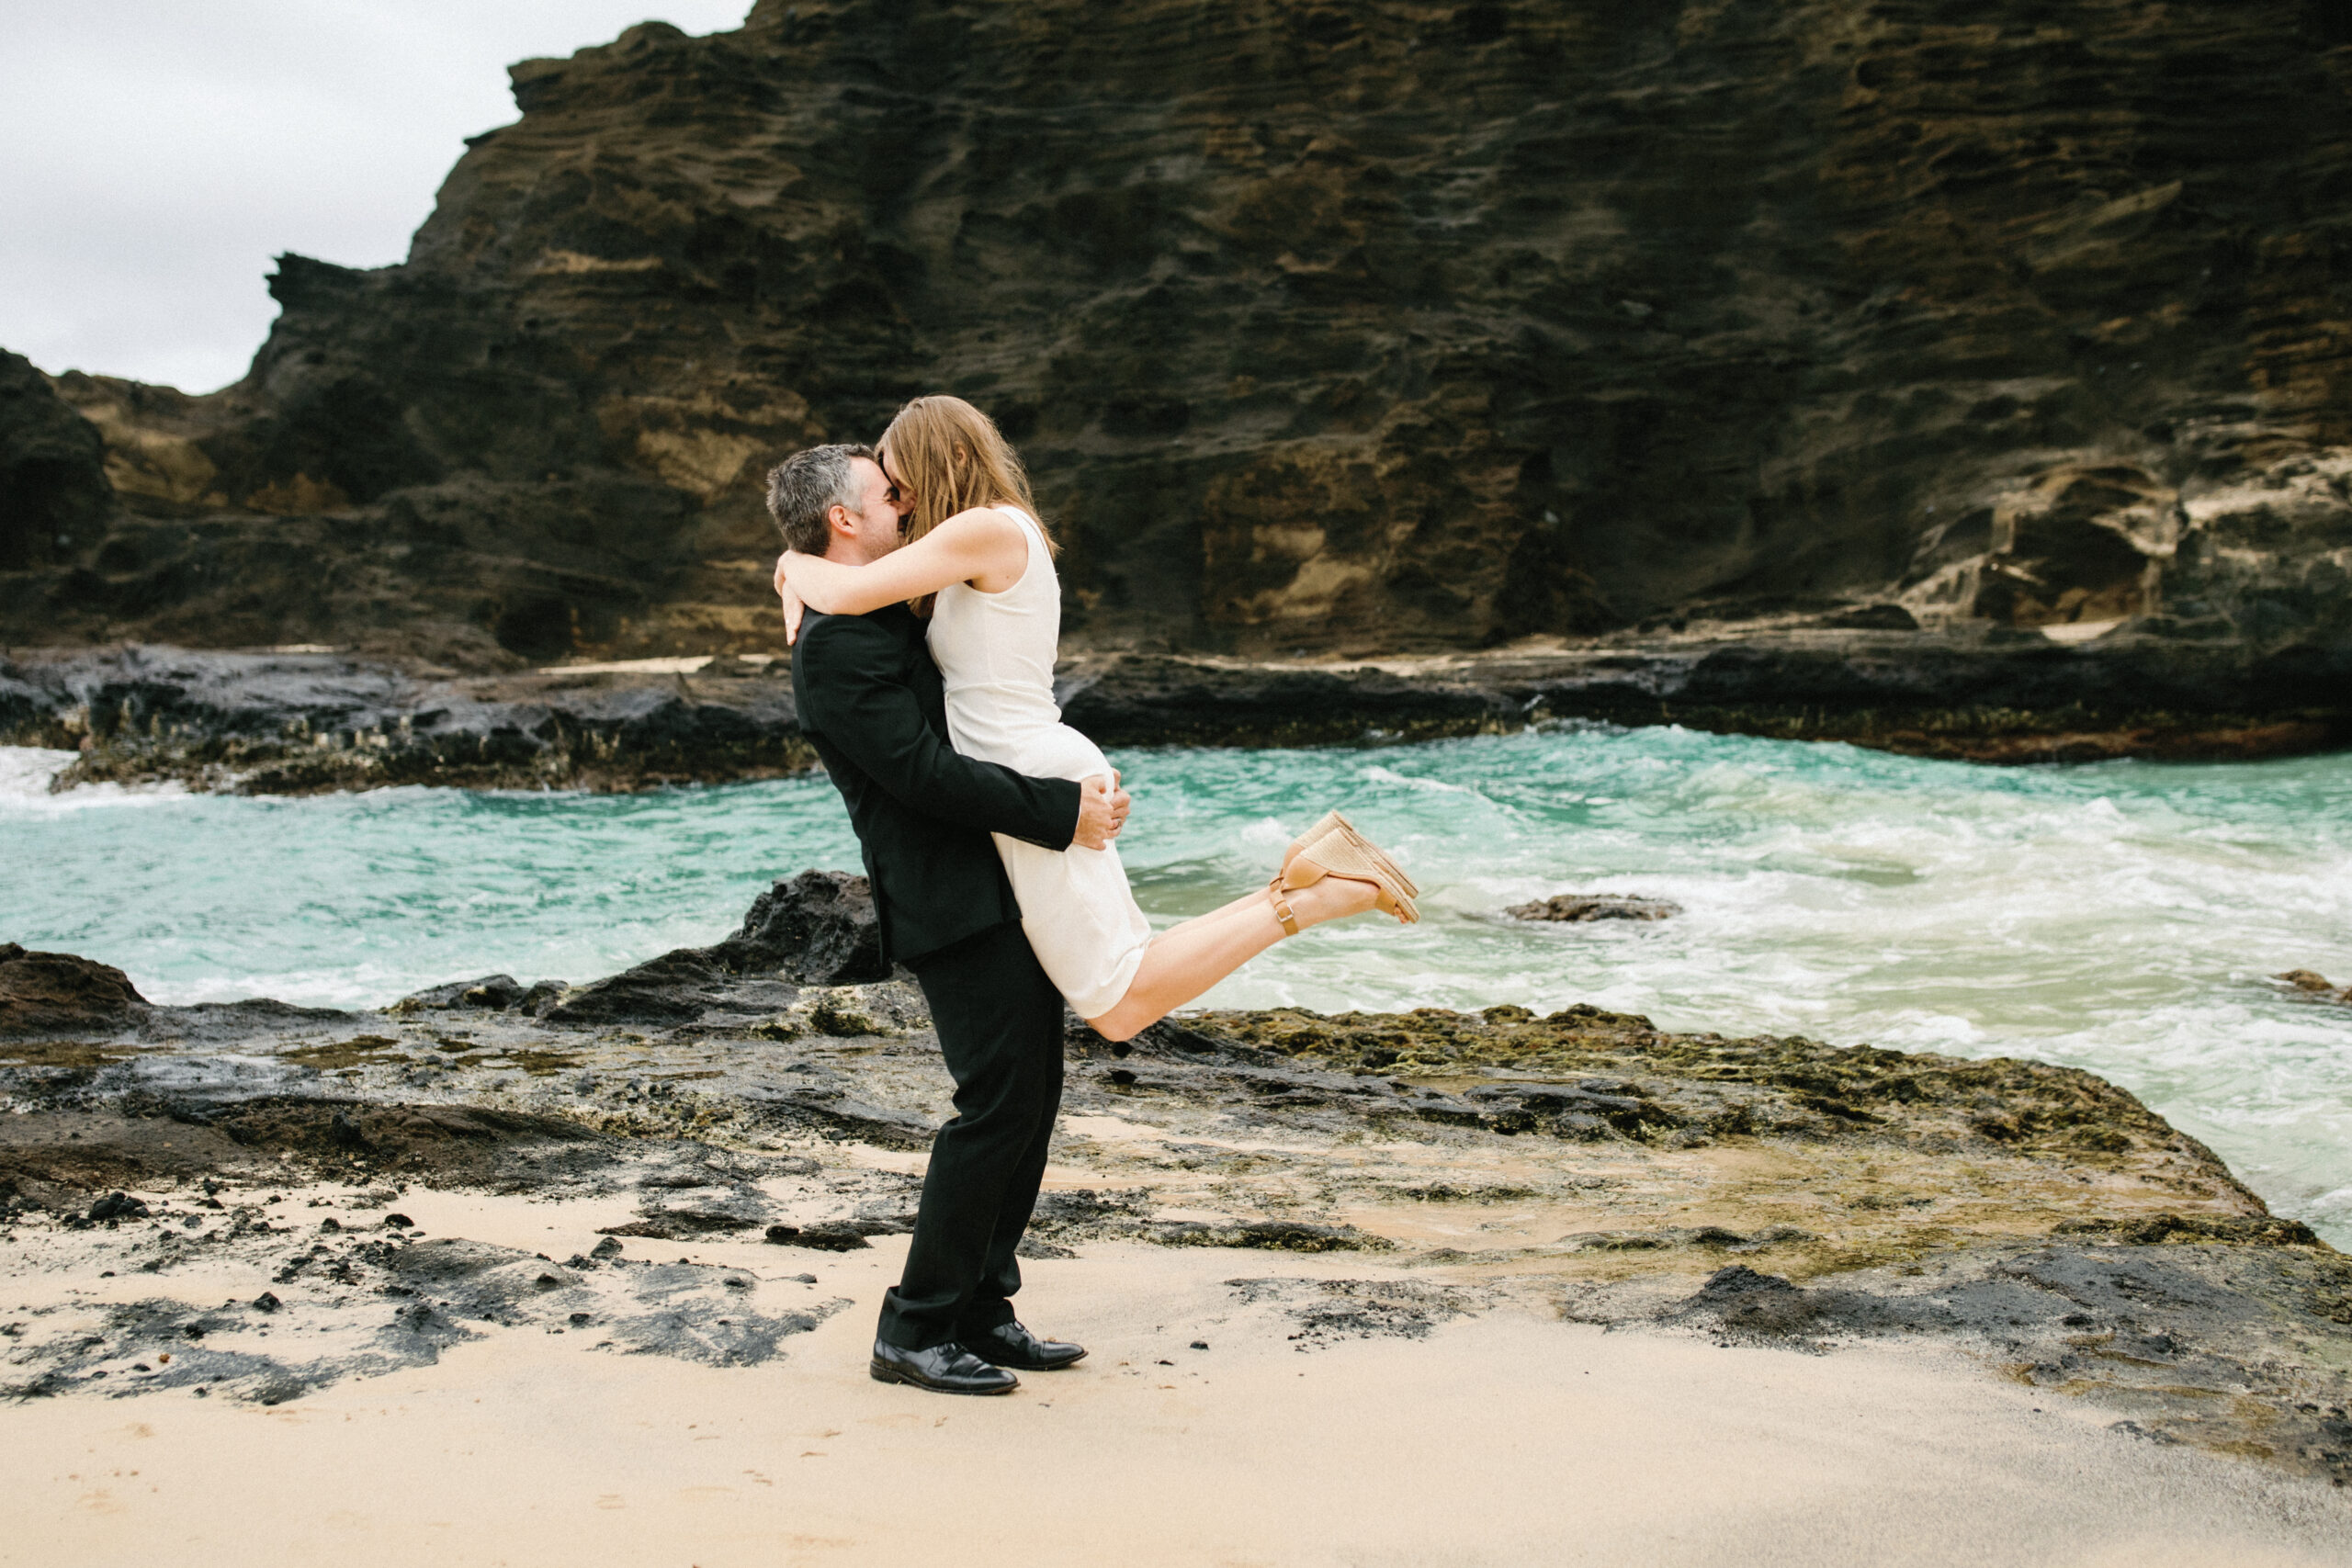 oahu beach brandon and vao couples photography annie groves 17 scaled